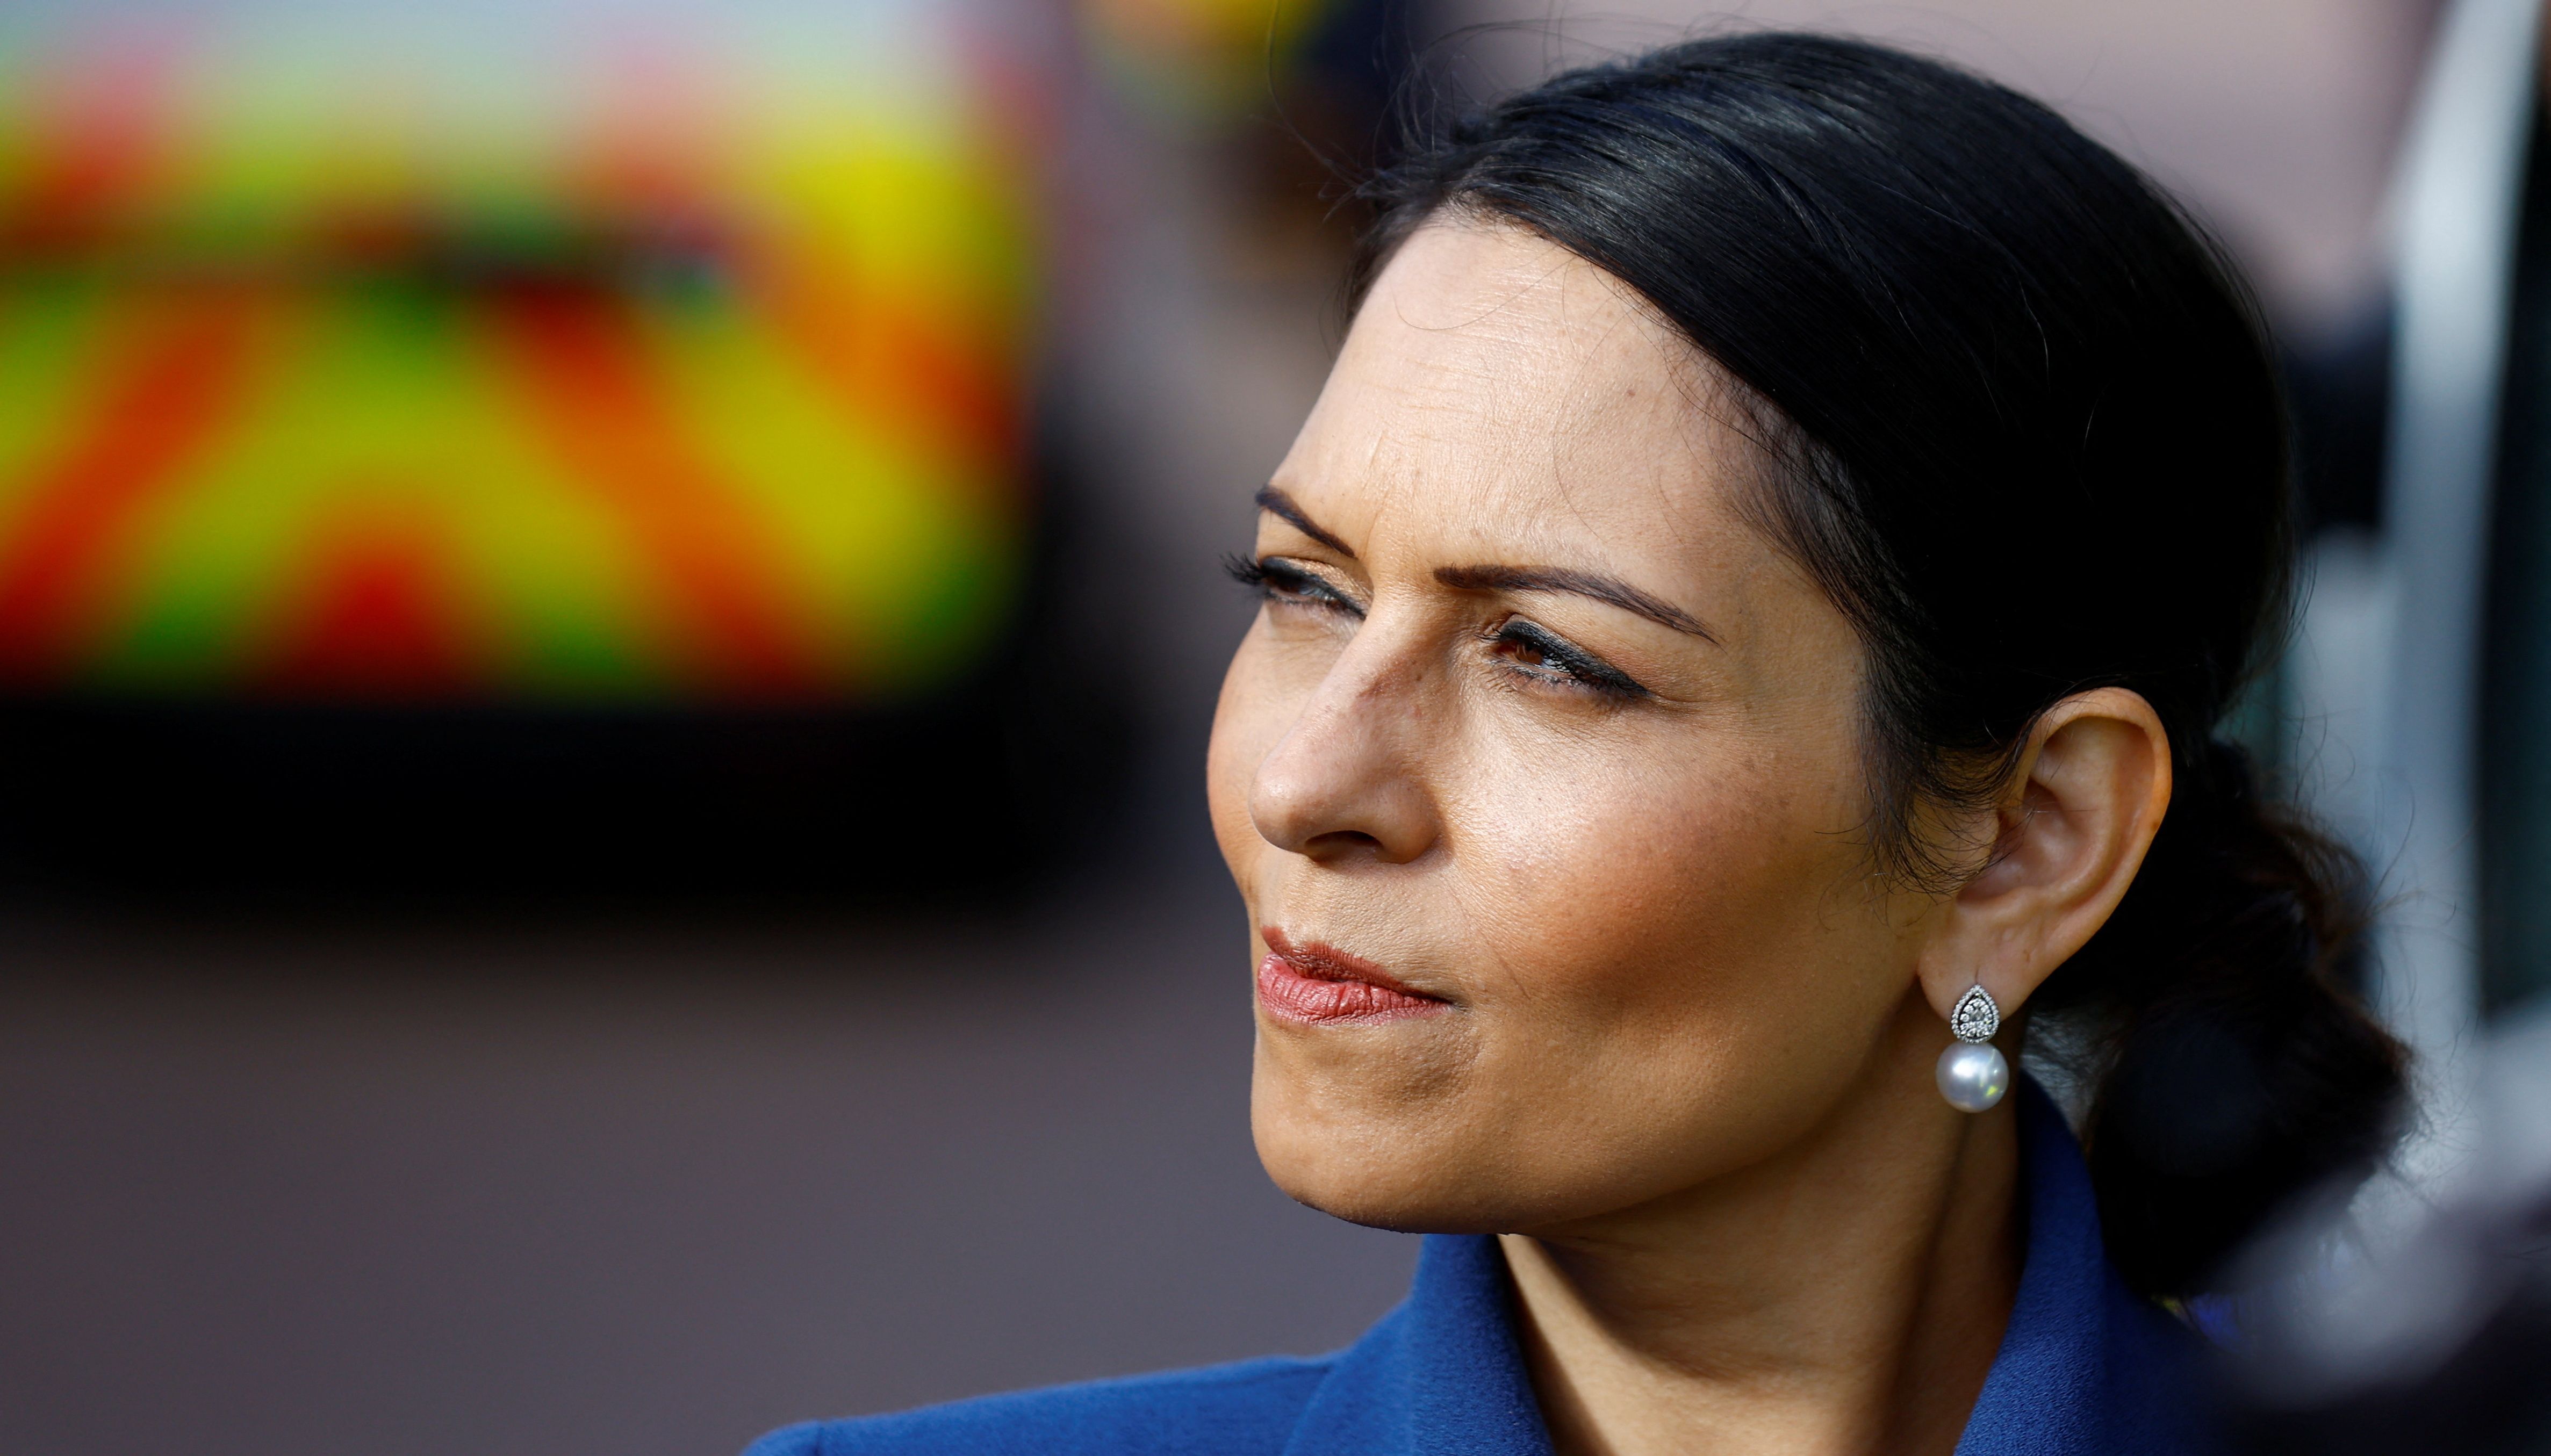 Home Secretary Priti Patel during a visit to Thames Valley Police, at Milton Keynes Police Station in Buckinghamshire.